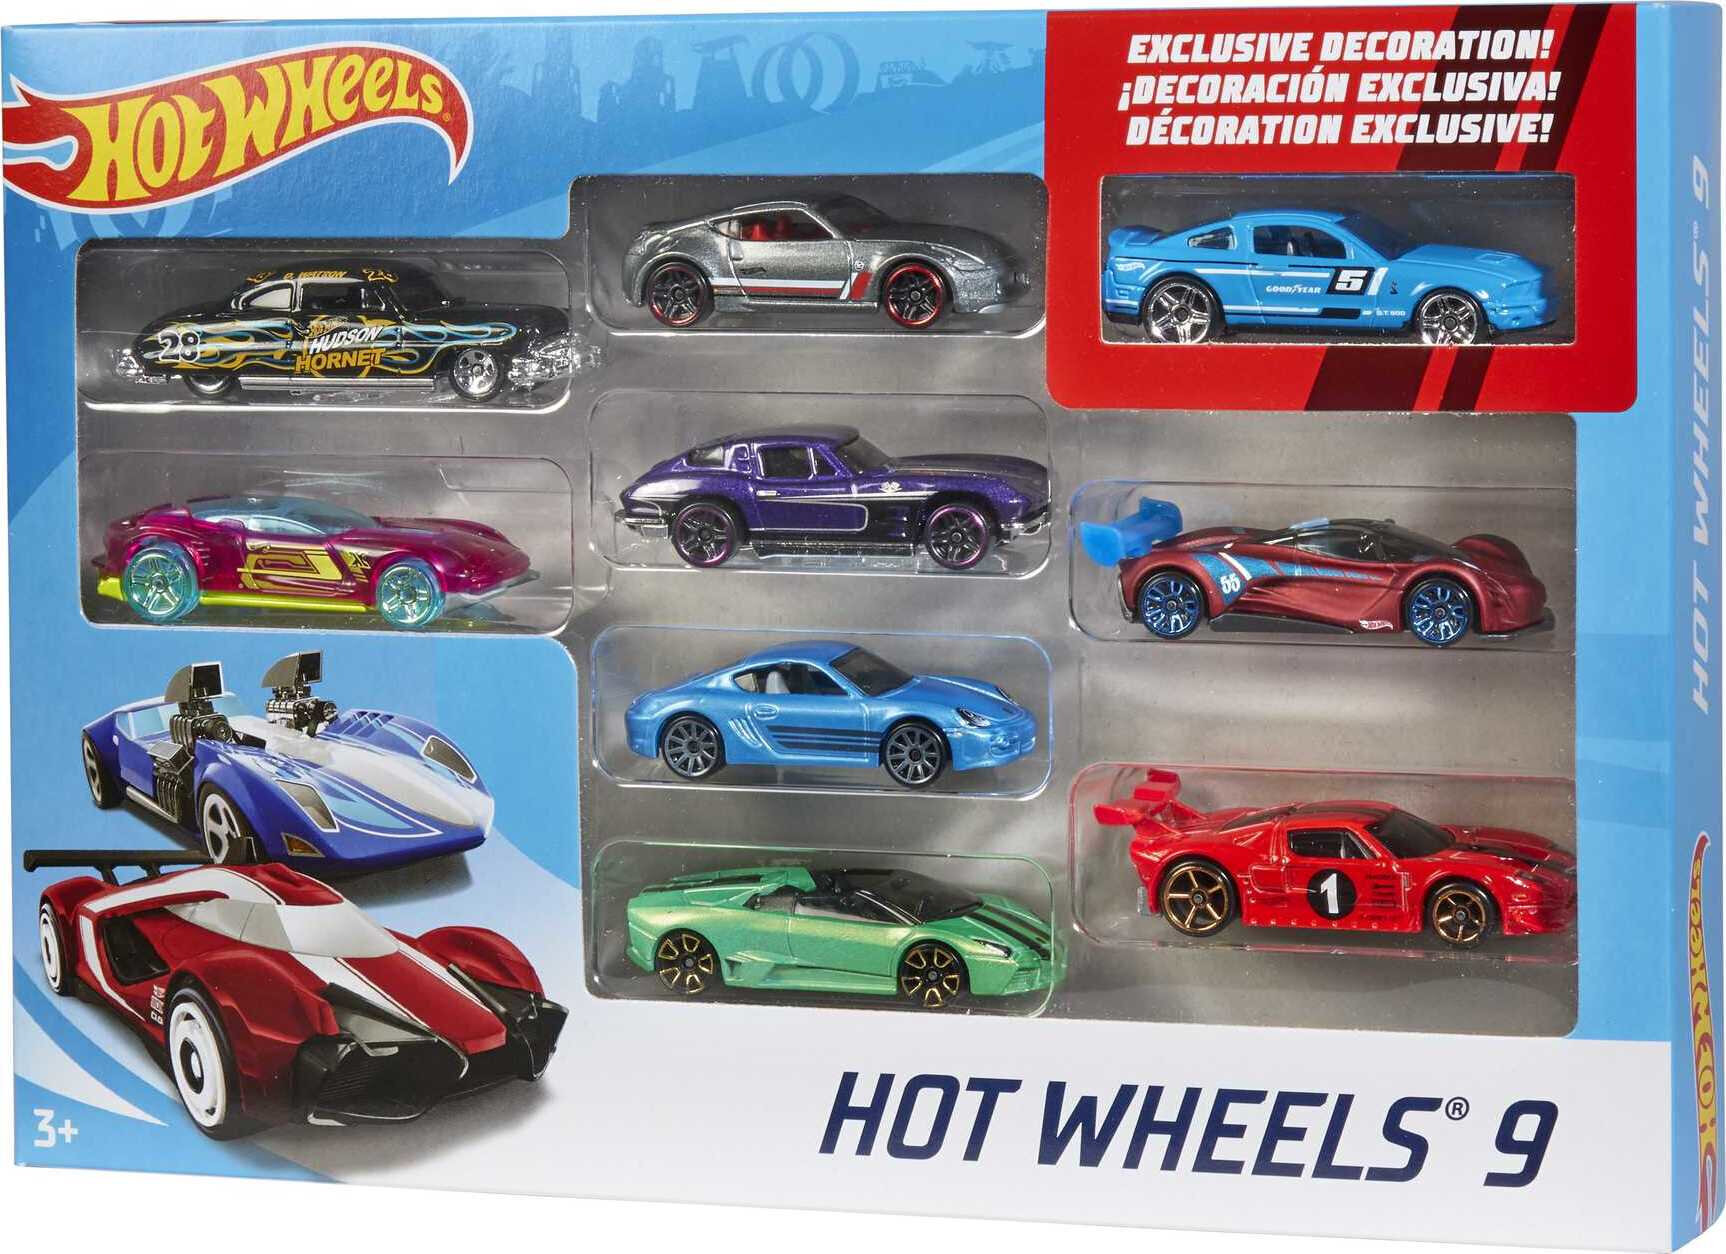 Hot Wheels Gift Set of 9 Toy Cars or Trucks in 1:64 Scale (Styles May Vary) - image 7 of 7